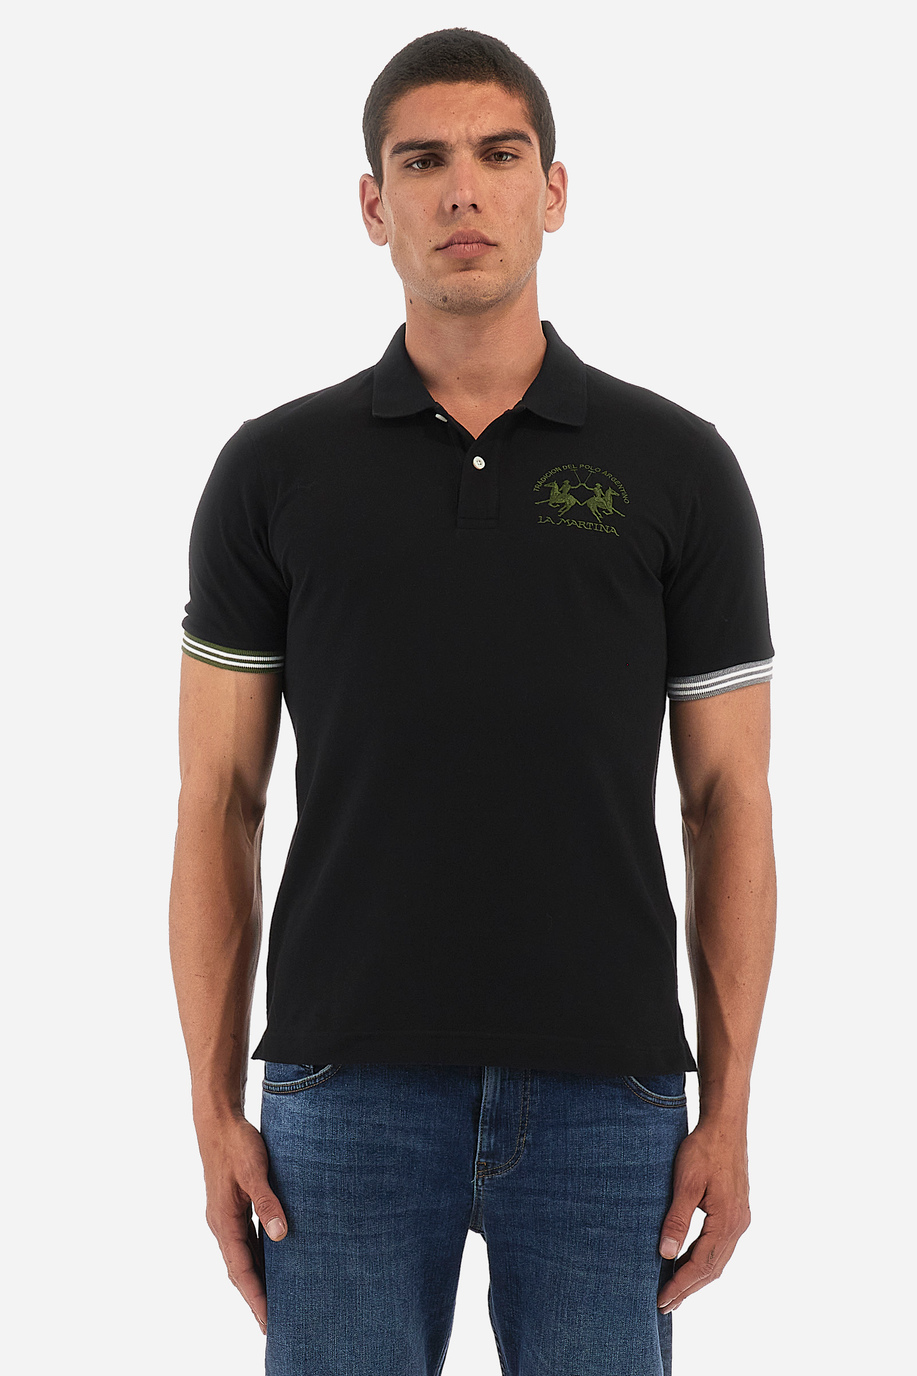 Men's polo shirt in a regular fit - Waddell - Essential | La Martina - Official Online Shop